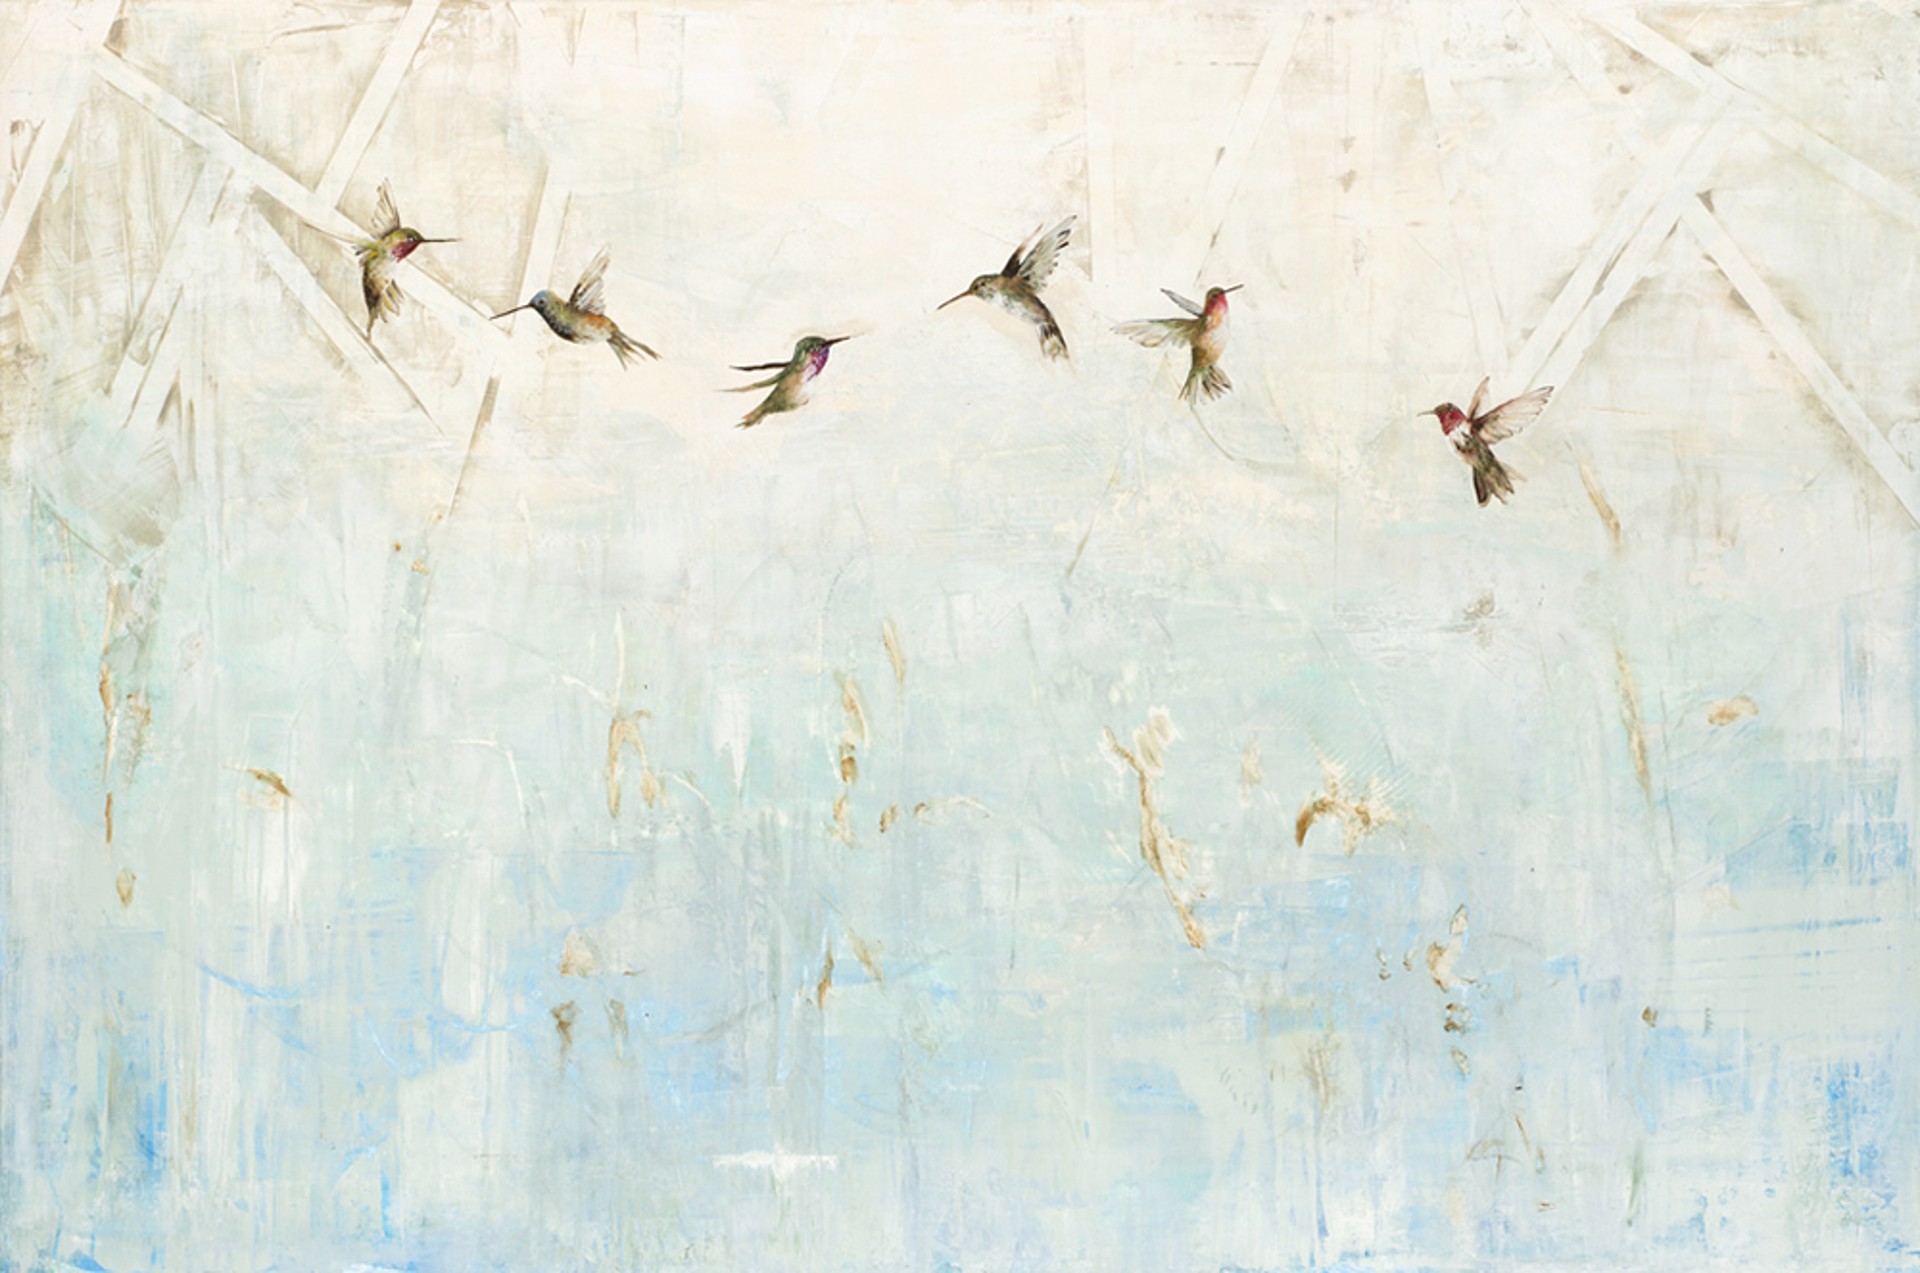 Oil Painting Of Humming Birds In Flight With An Abstract Light Blue And Patterned Background By Jenna Von Benedikt